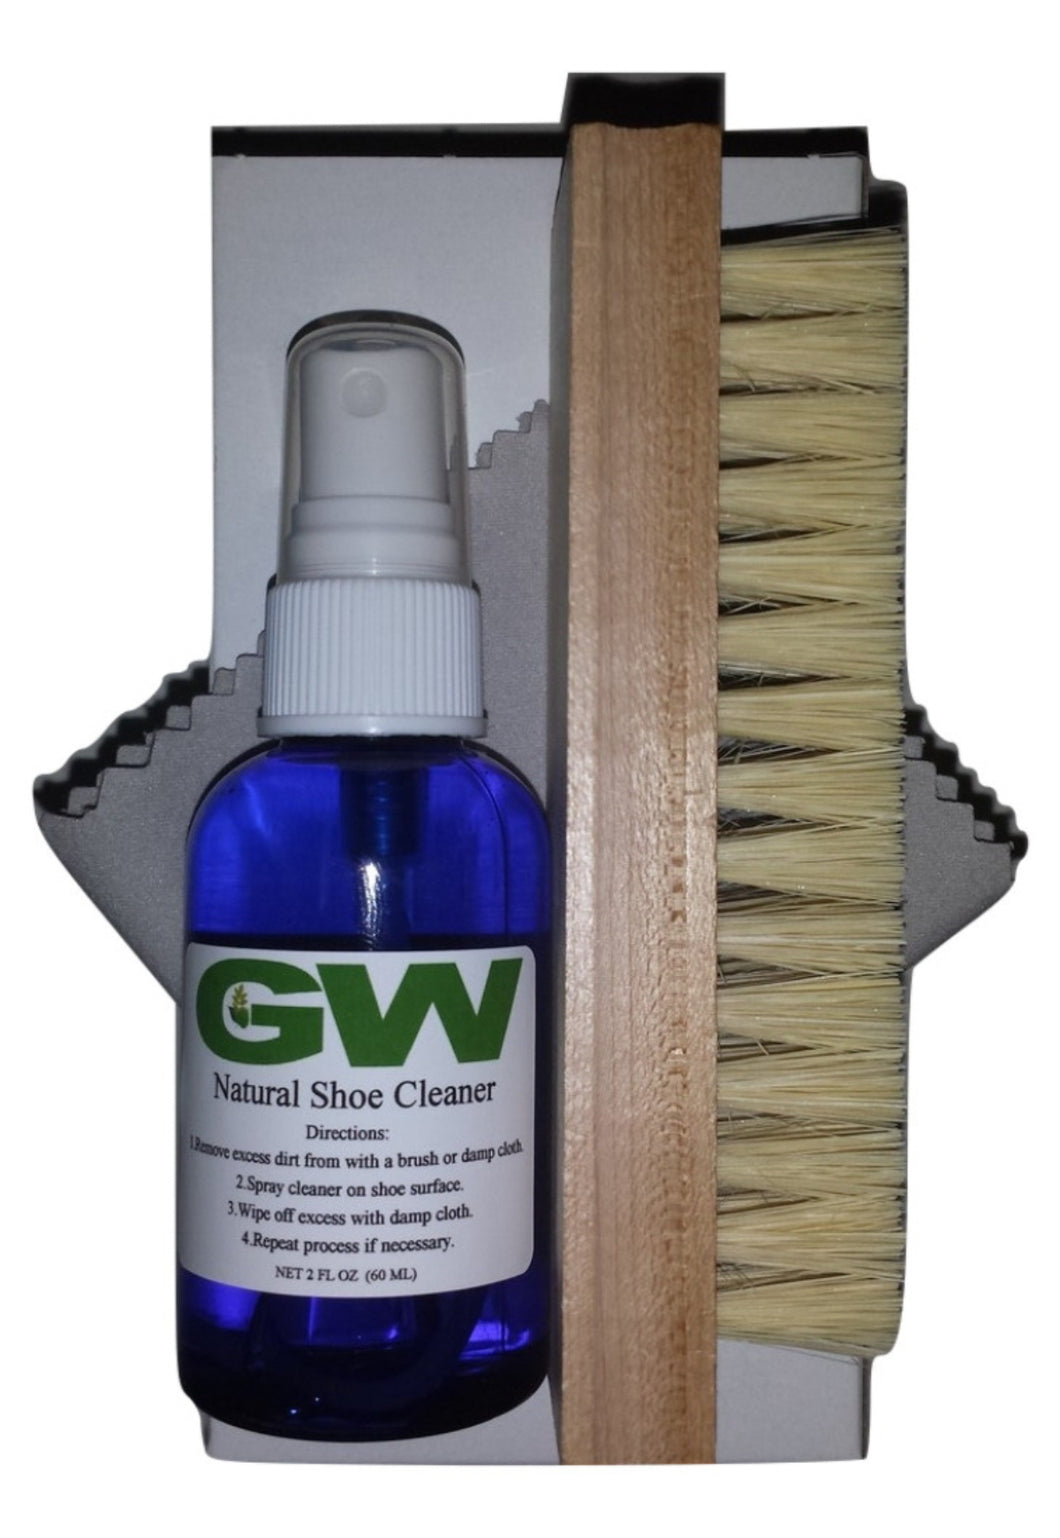 GW Premium Deluxe Shoe Cleaner Kit for Shoes, Boots, and Sneakers with Handcrafted Wooden Brush and Microfiber Cloth